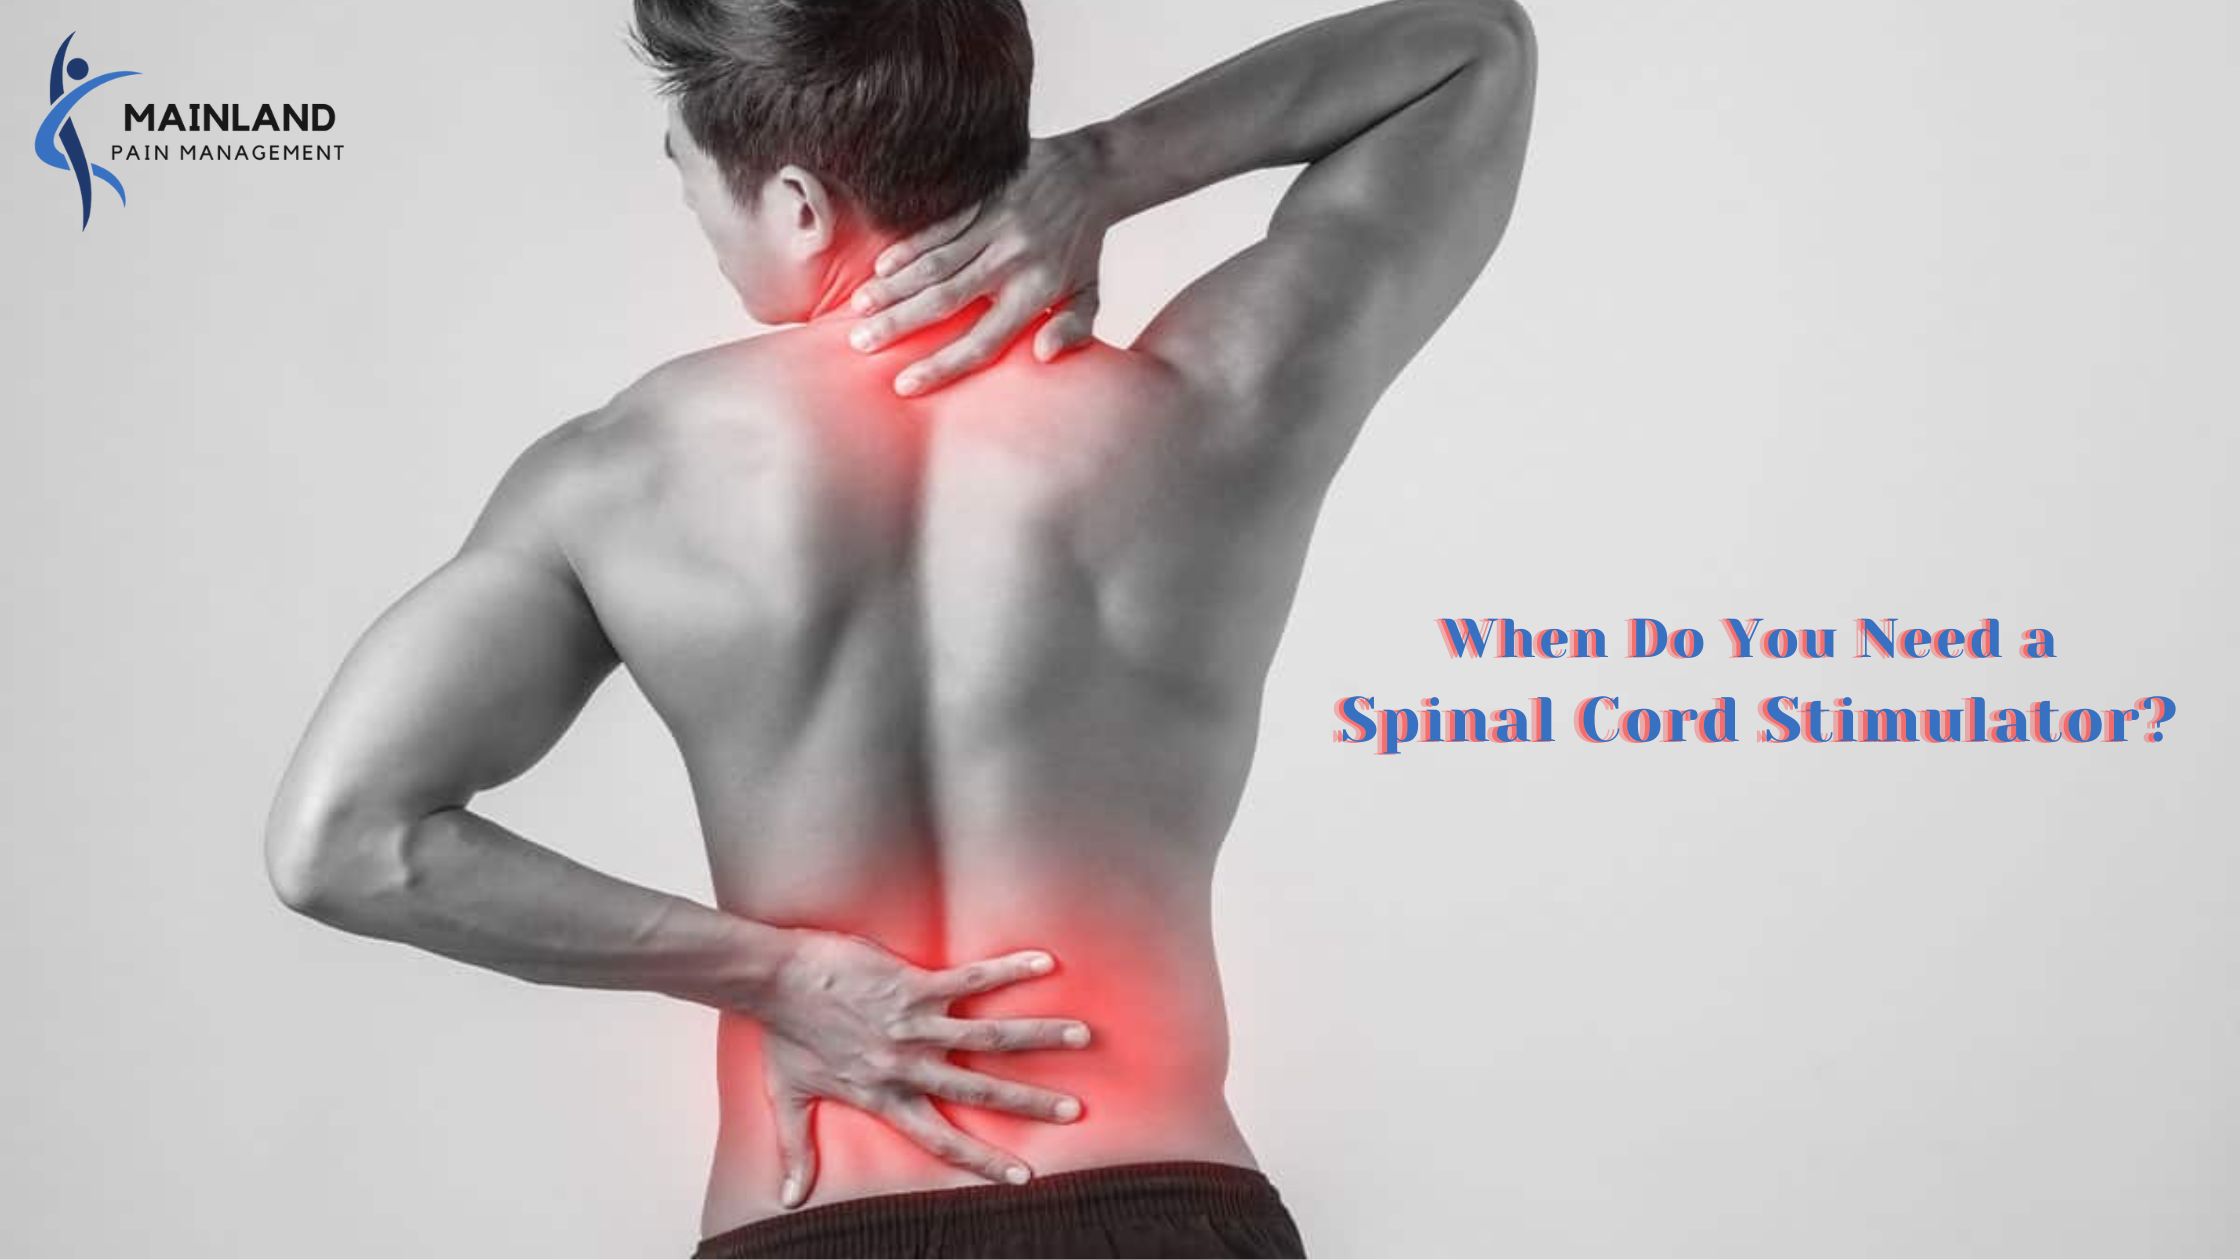 When Do You Need a Spinal Cord Stimulator